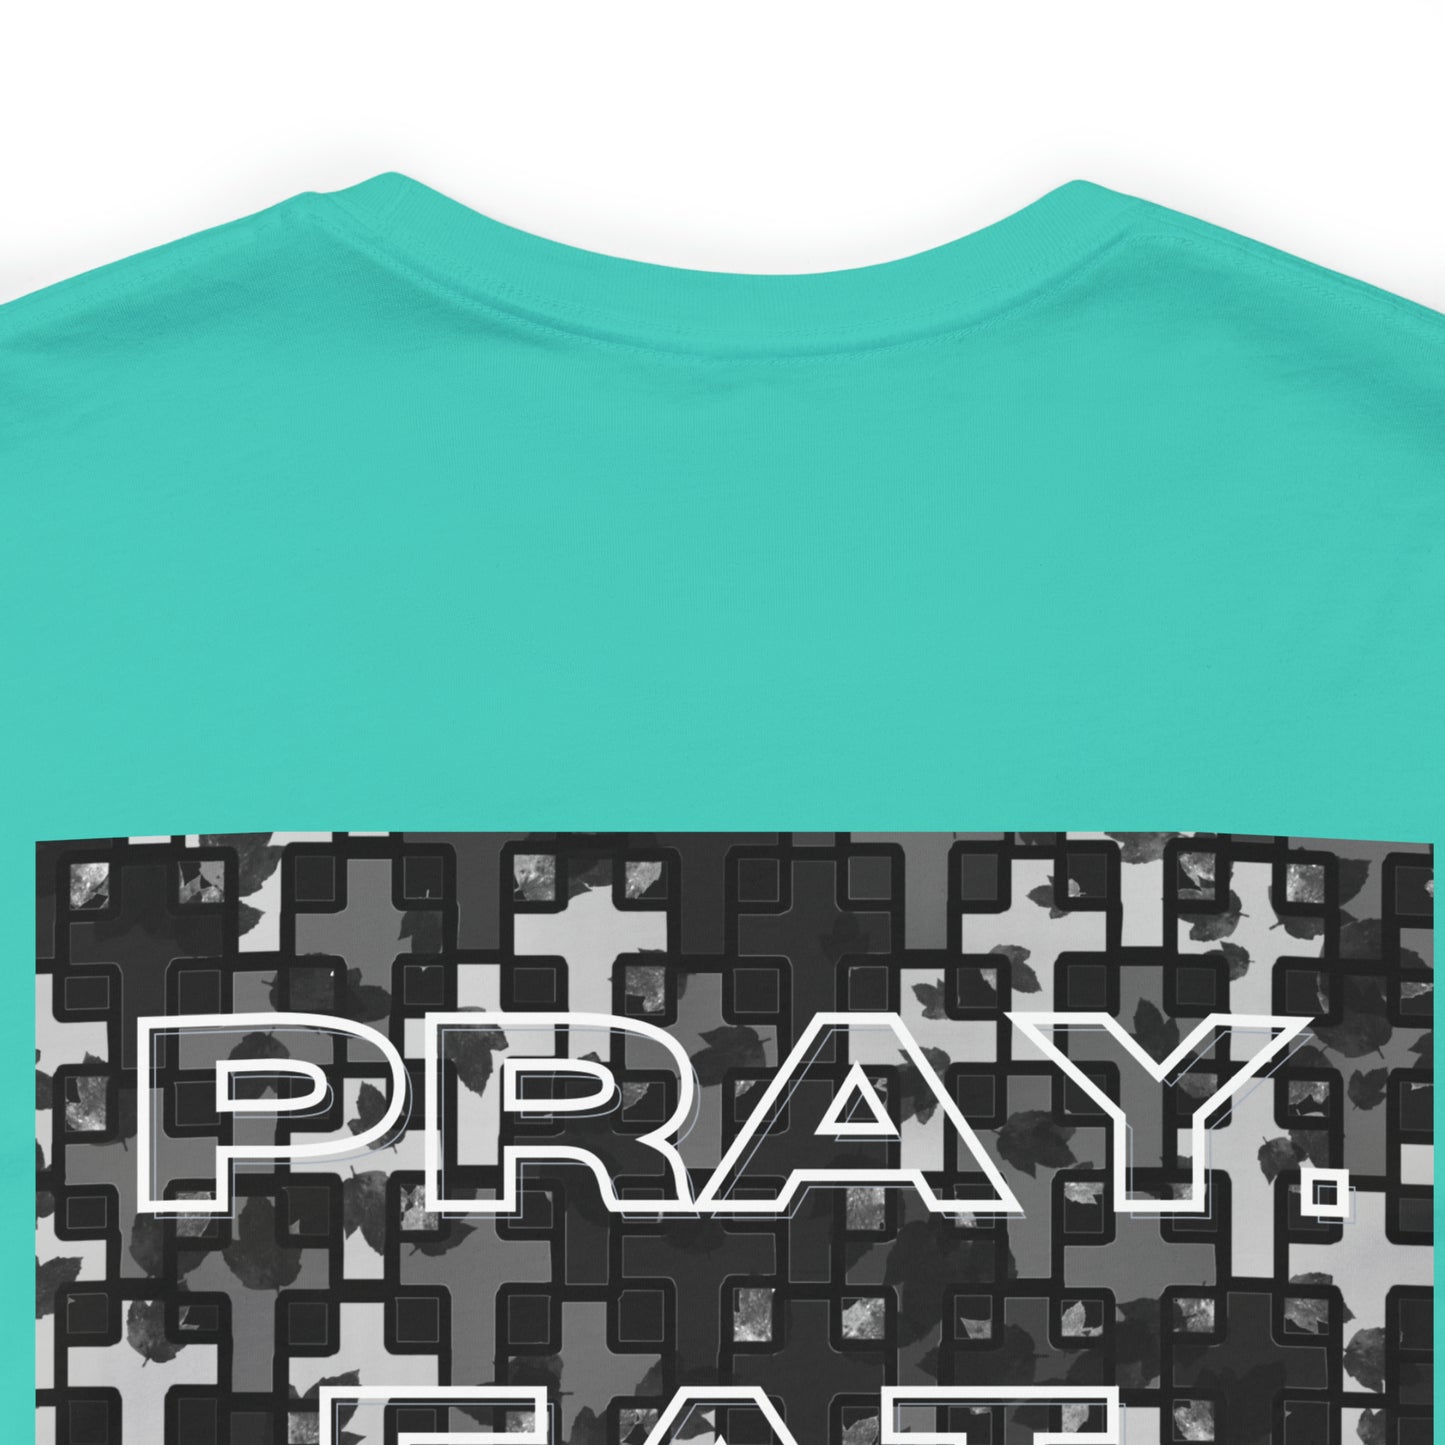 Pray. Eat. Sleep. Hunt! 100% cotton athletic fit T shirts…Proudly made in the USA.